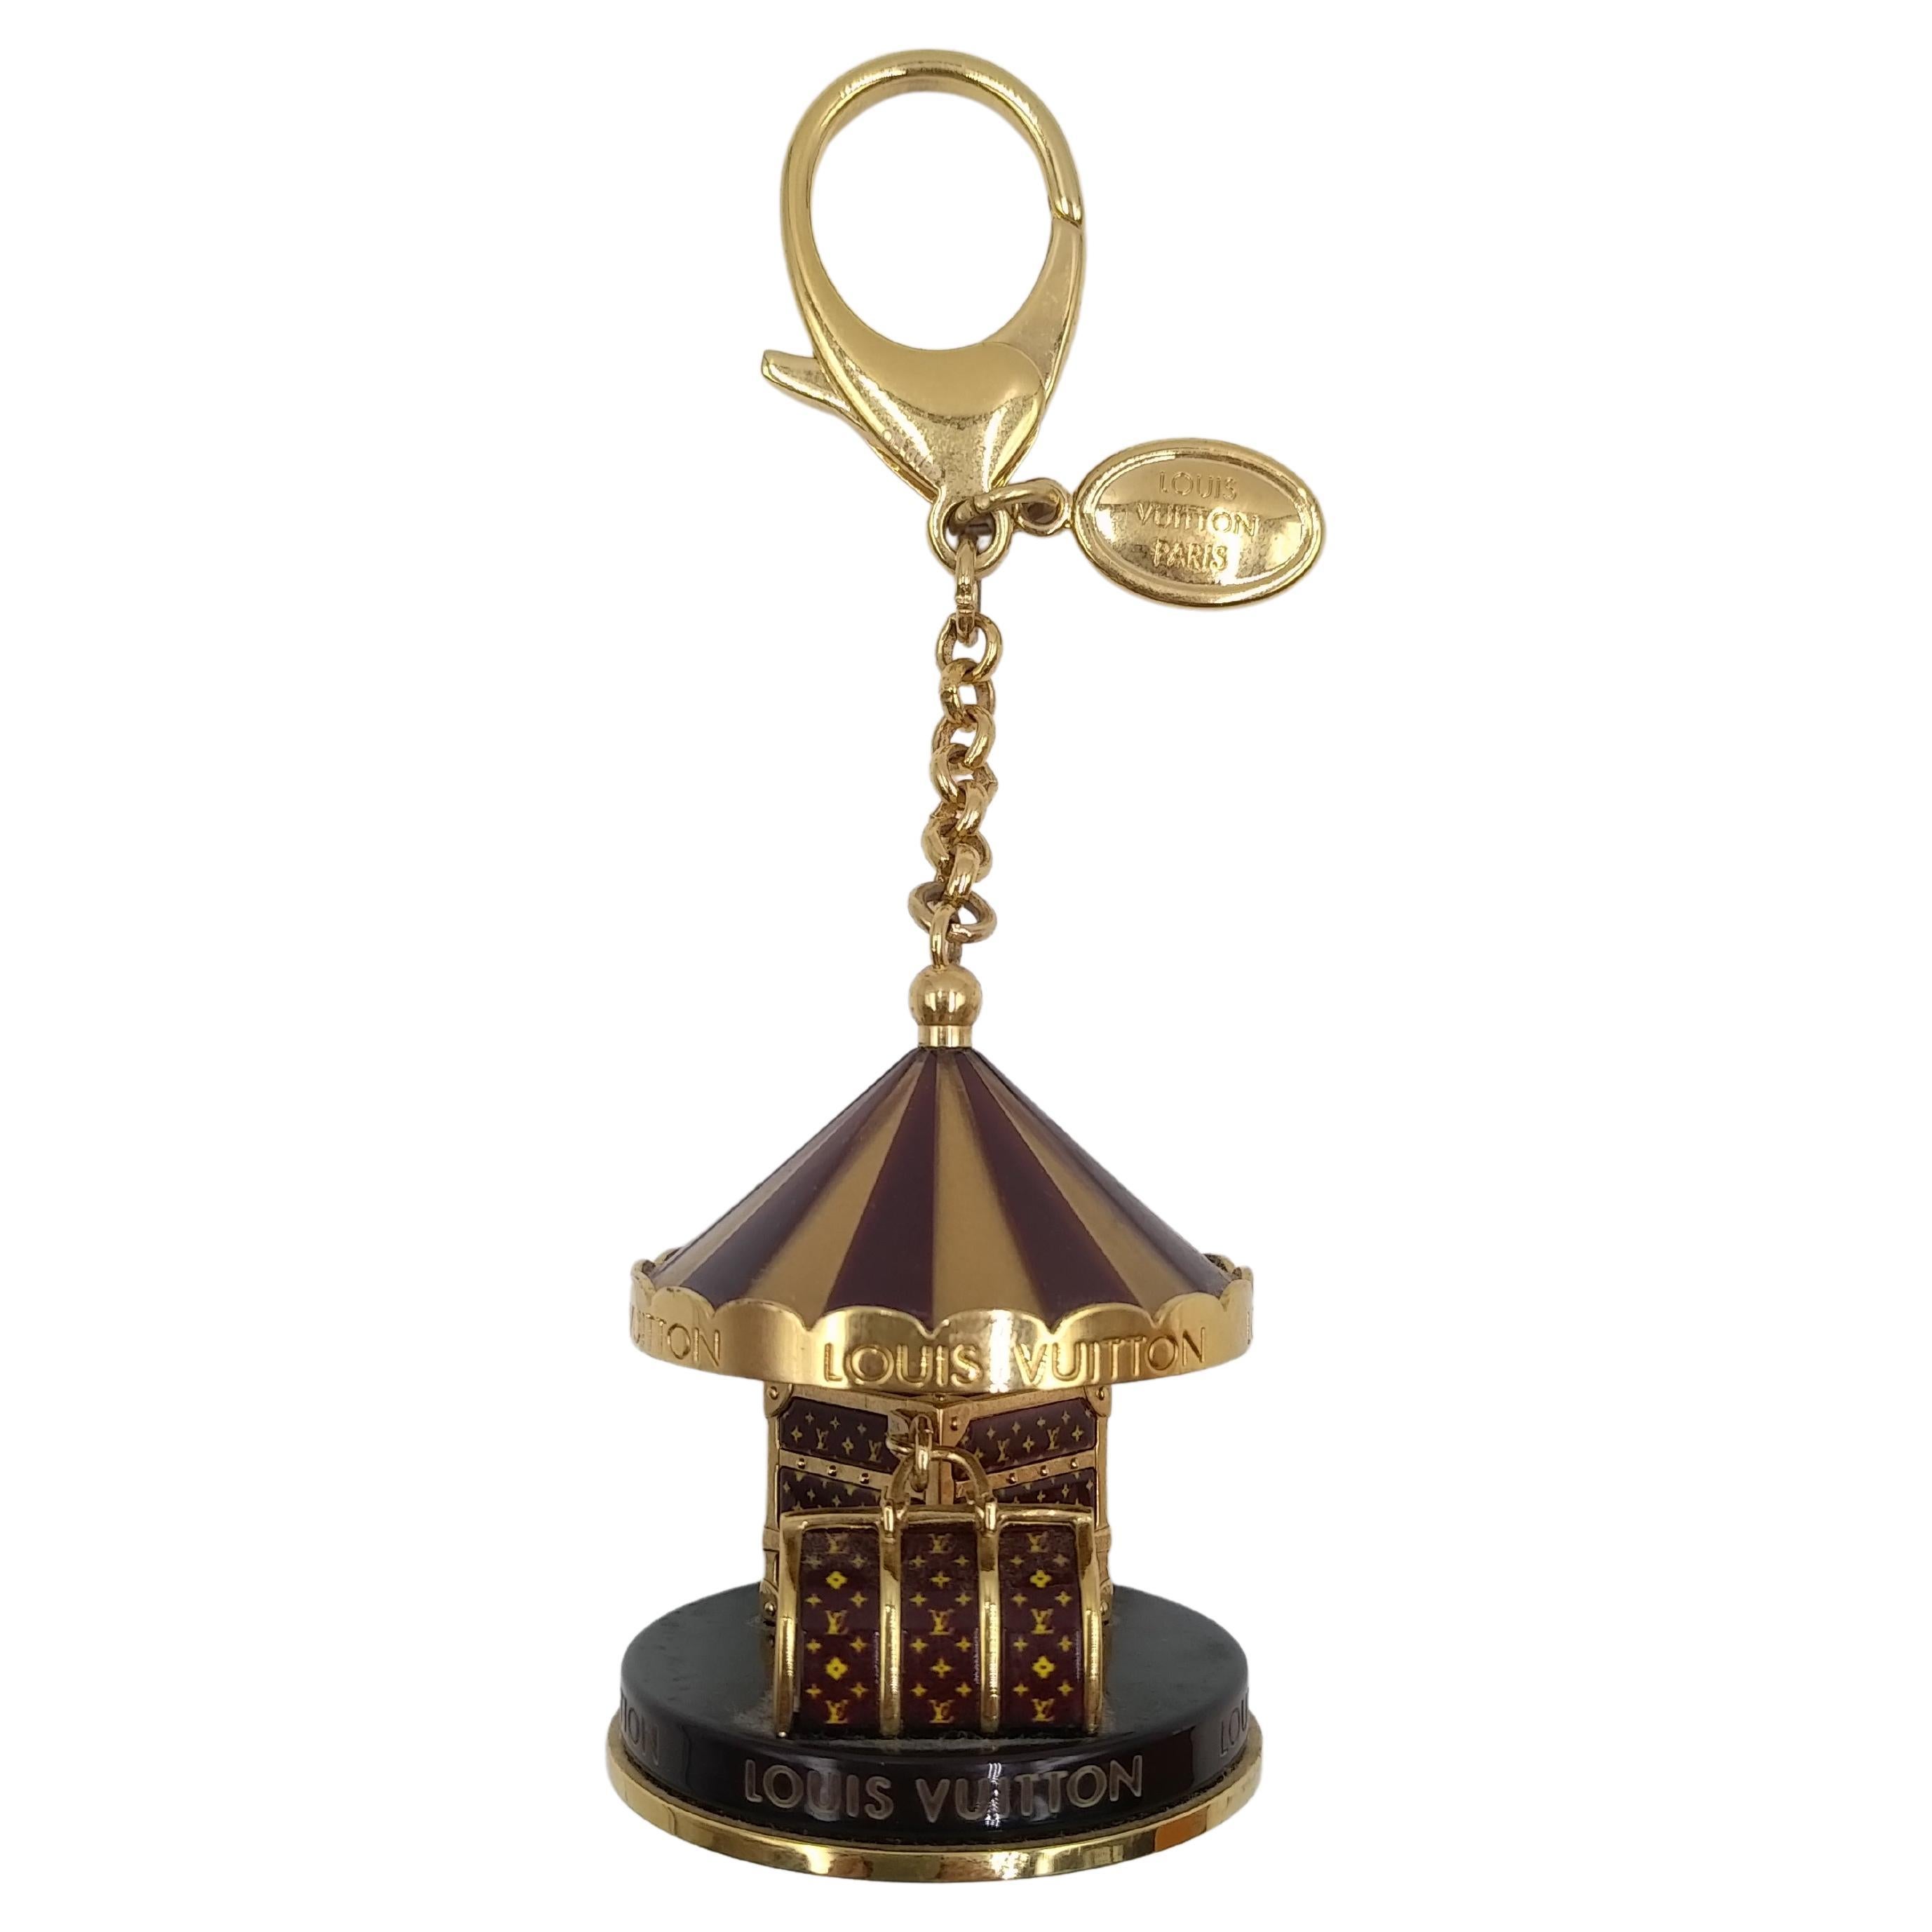 Louis Vuitton Gold/Brown Monogram Carousel Key Chain and Bag Charm, F/W 2012
- 100% authentic Louis Vuitton
- Goldtone metal
- Closure with oversized lobster clasp
- Comes with box and dust bag